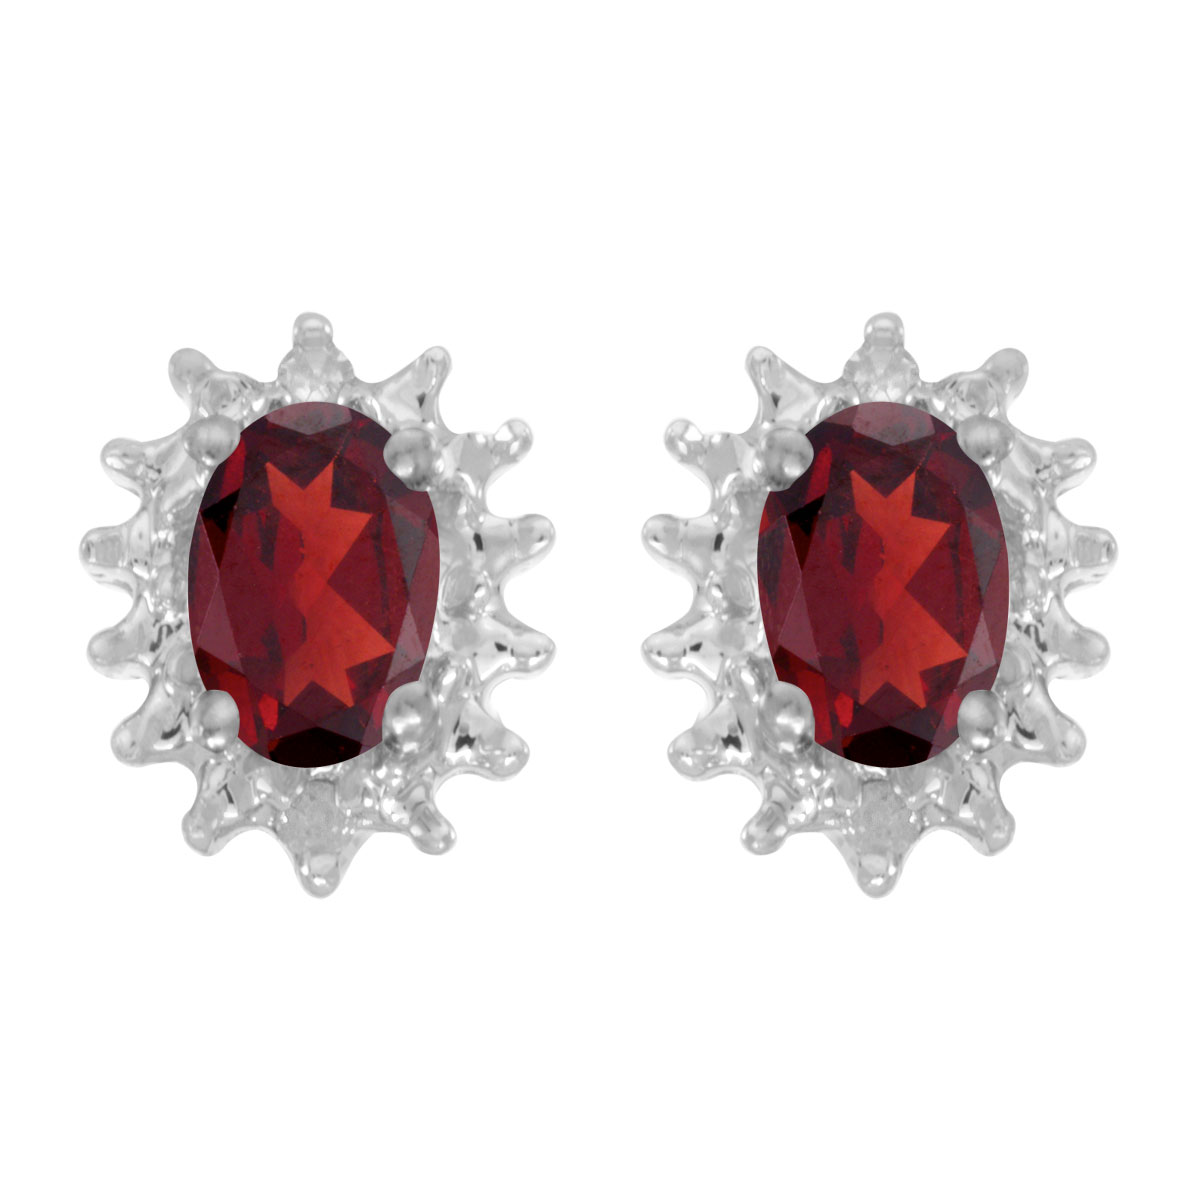 JCX2002: These 14k white gold oval garnet and diamond earrings feature 6x4 mm genuine natural garnets with a 0.94 ct total weight and .04 ct diamonds.